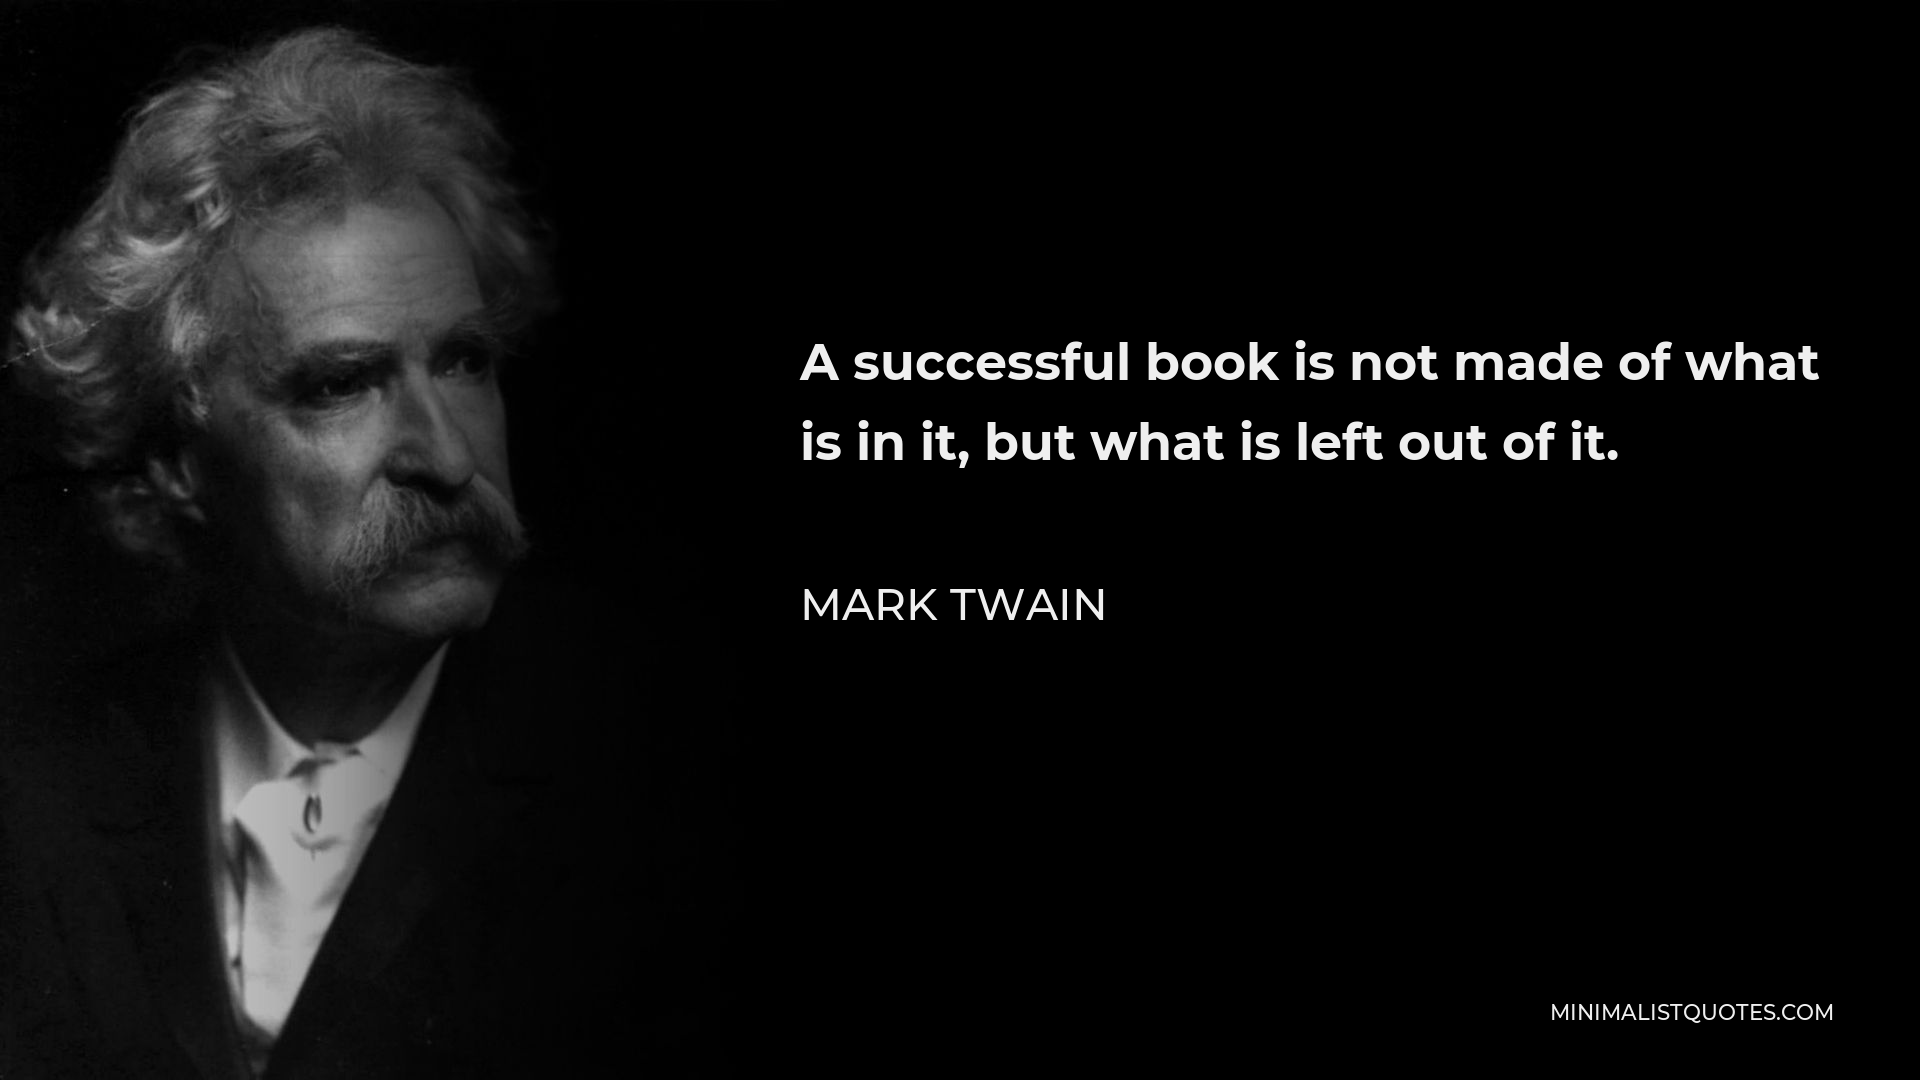 Mark Twain Quote - A successful book is not made of what is in it, but what is left out of it.